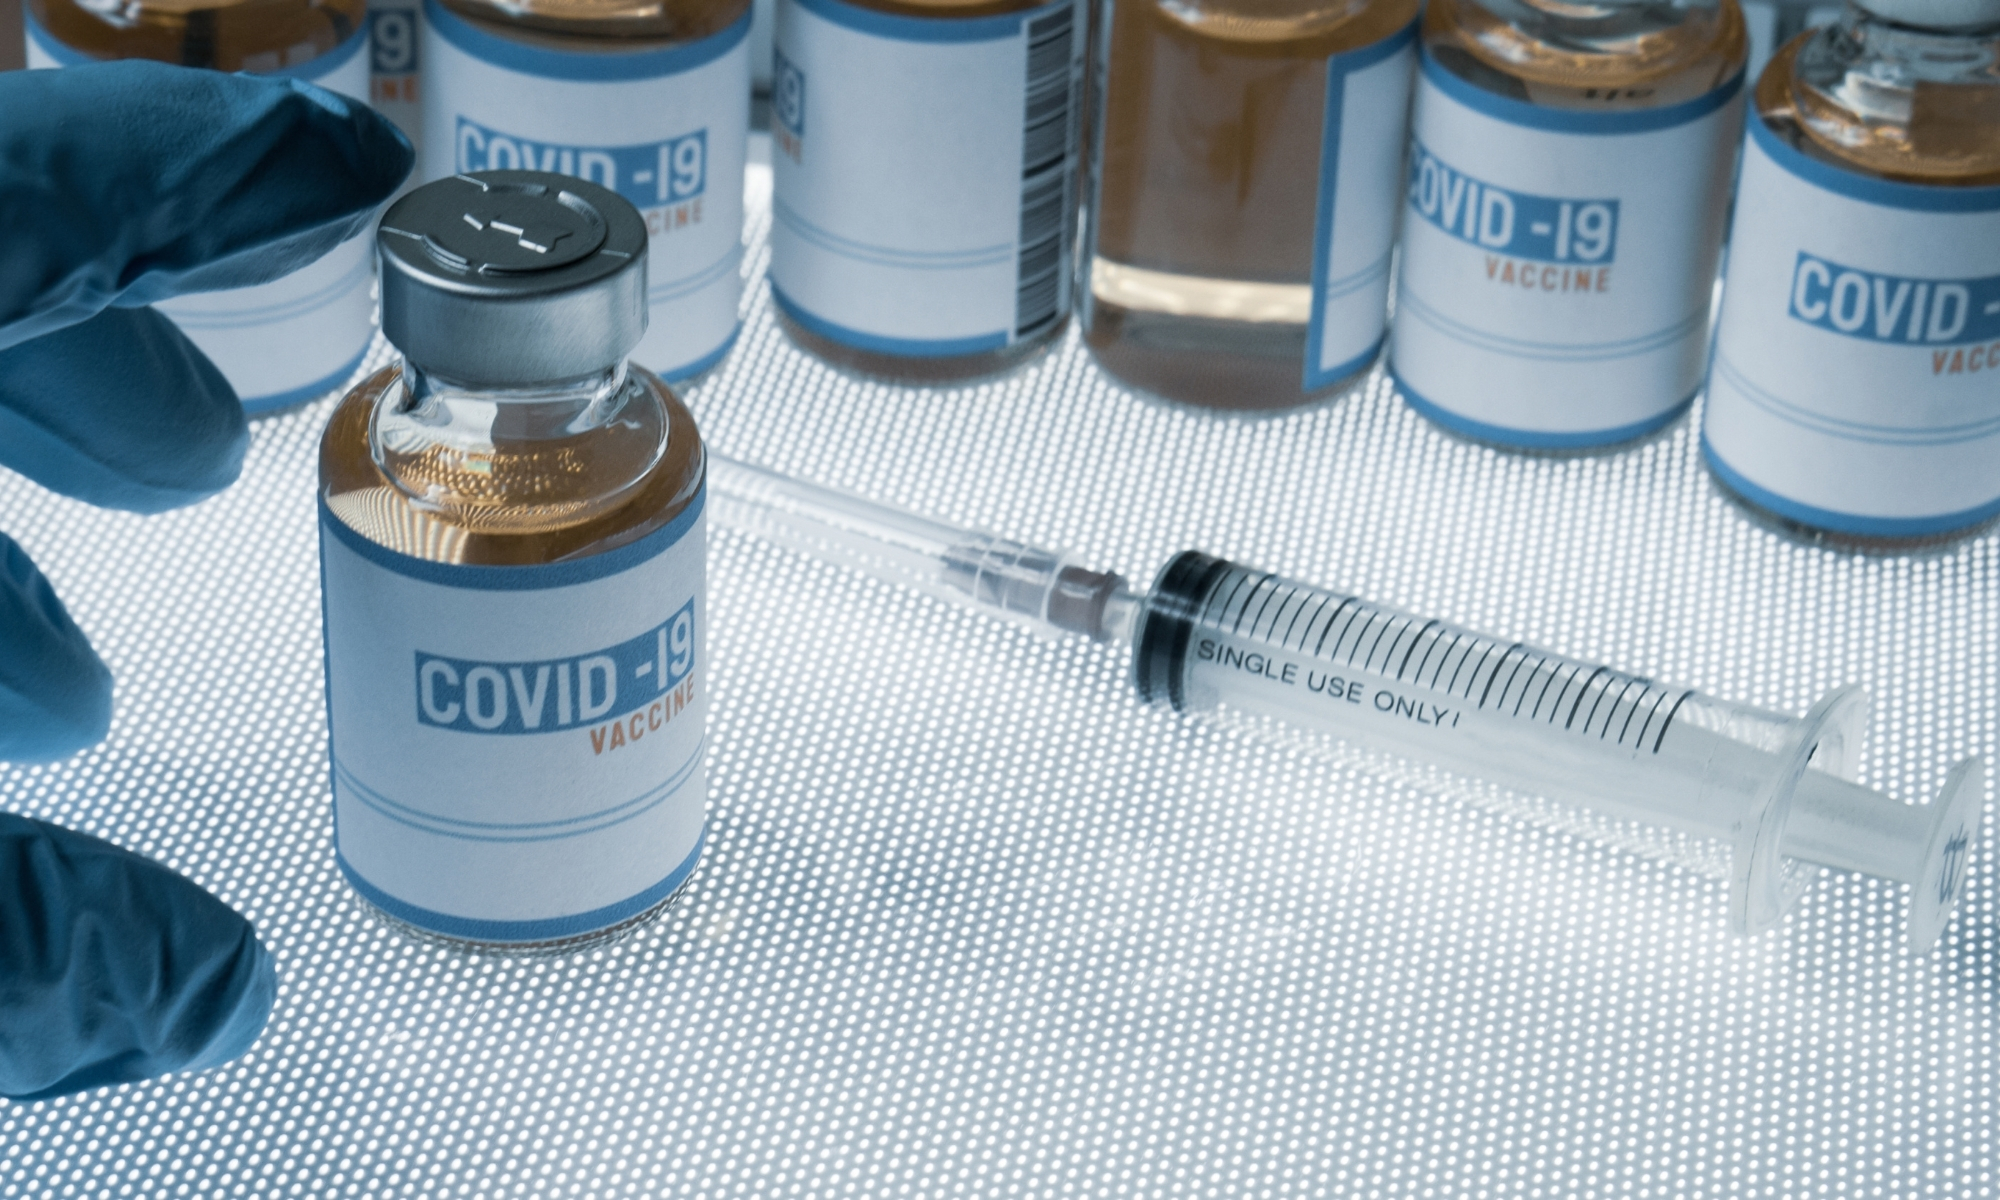 Image of COVID-19 vaccine and needle.